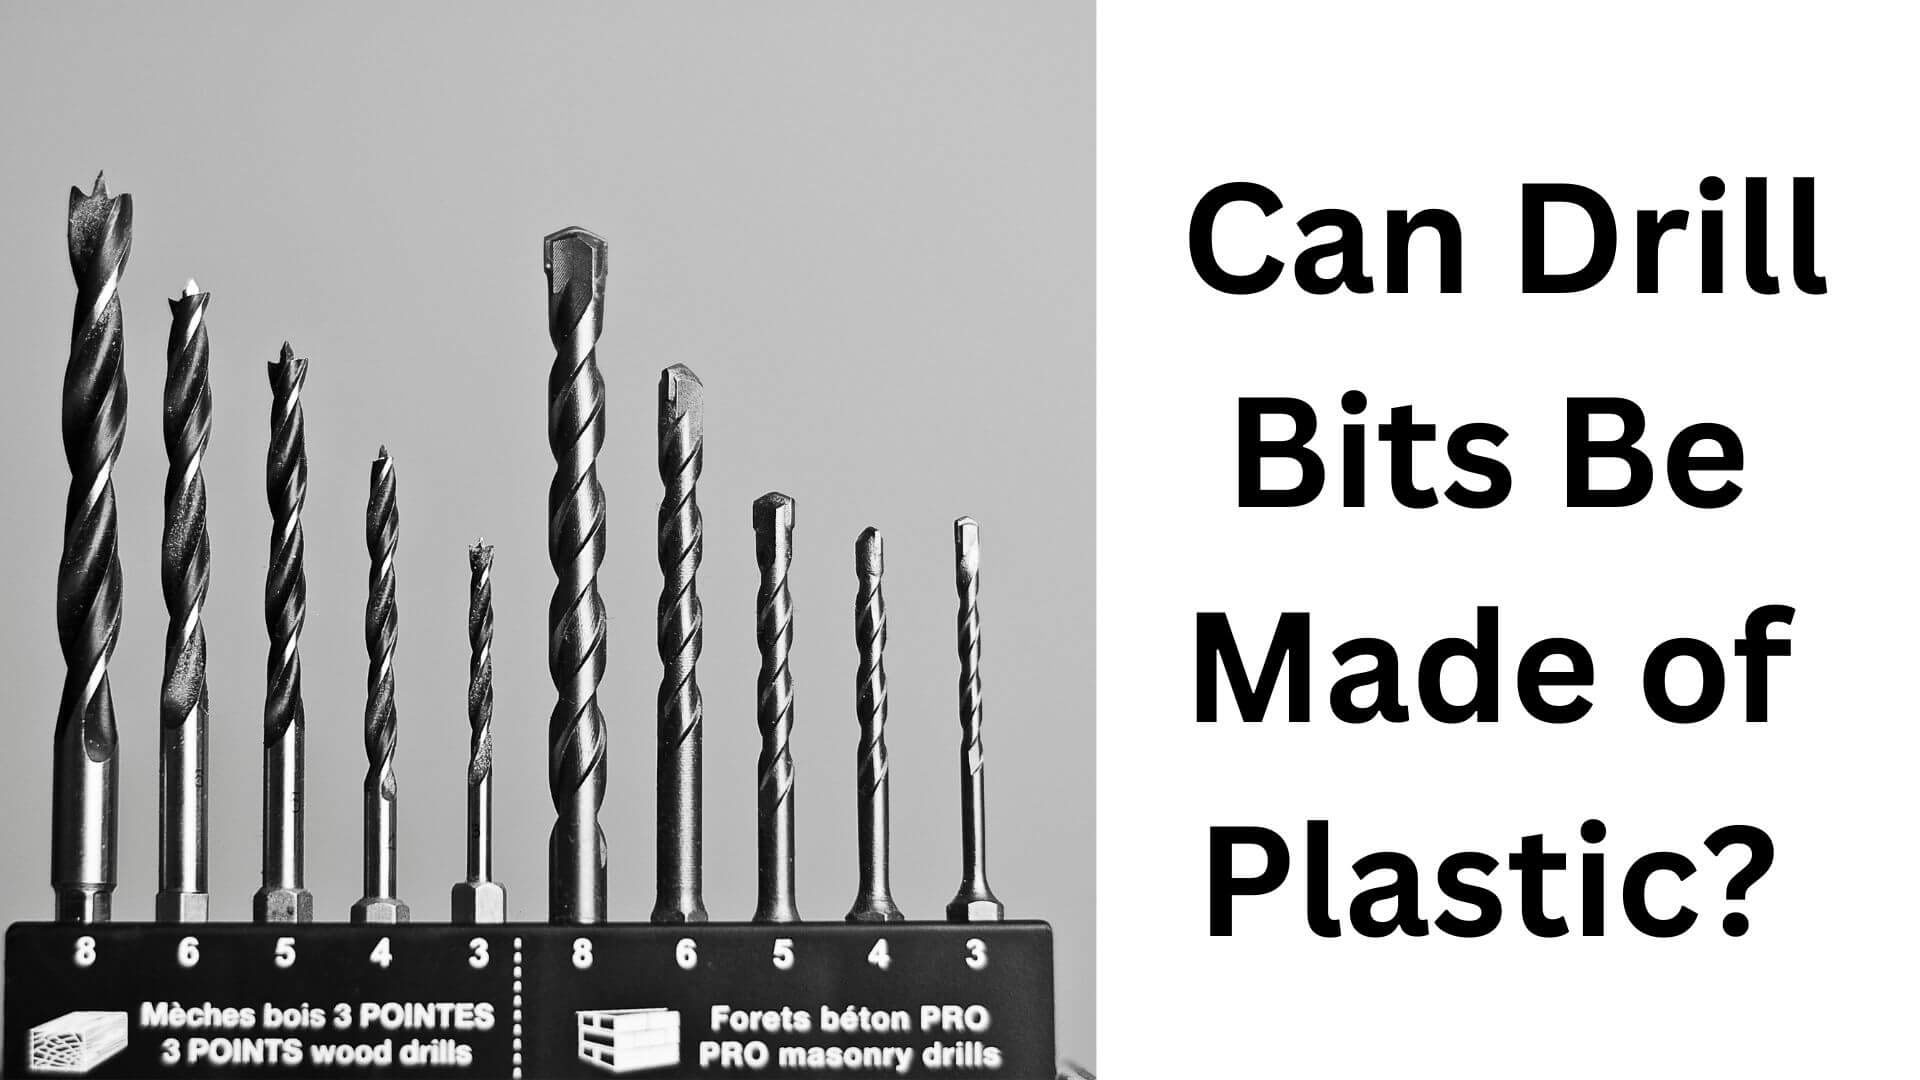 Can Drill Bits Be Made of Plastic?